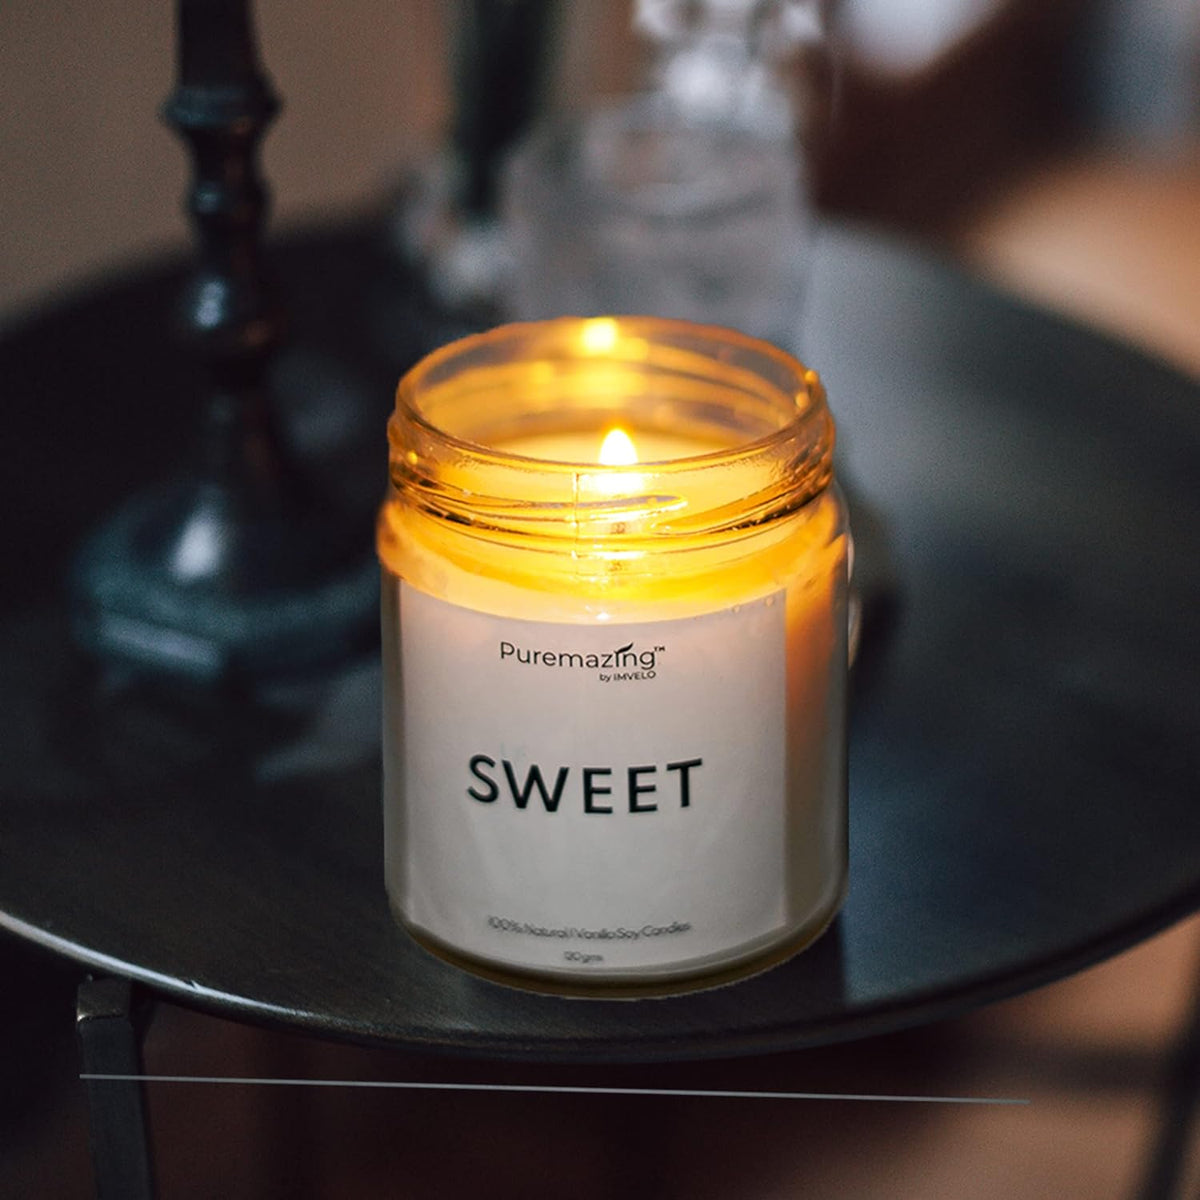 Puremazing Soy Wax Candle | Sweet(Vanilla) + Sensuous(Rose) fragranced | Scented Candles Glass Jar | Valentine Day, Bedroom, Spa, Home.